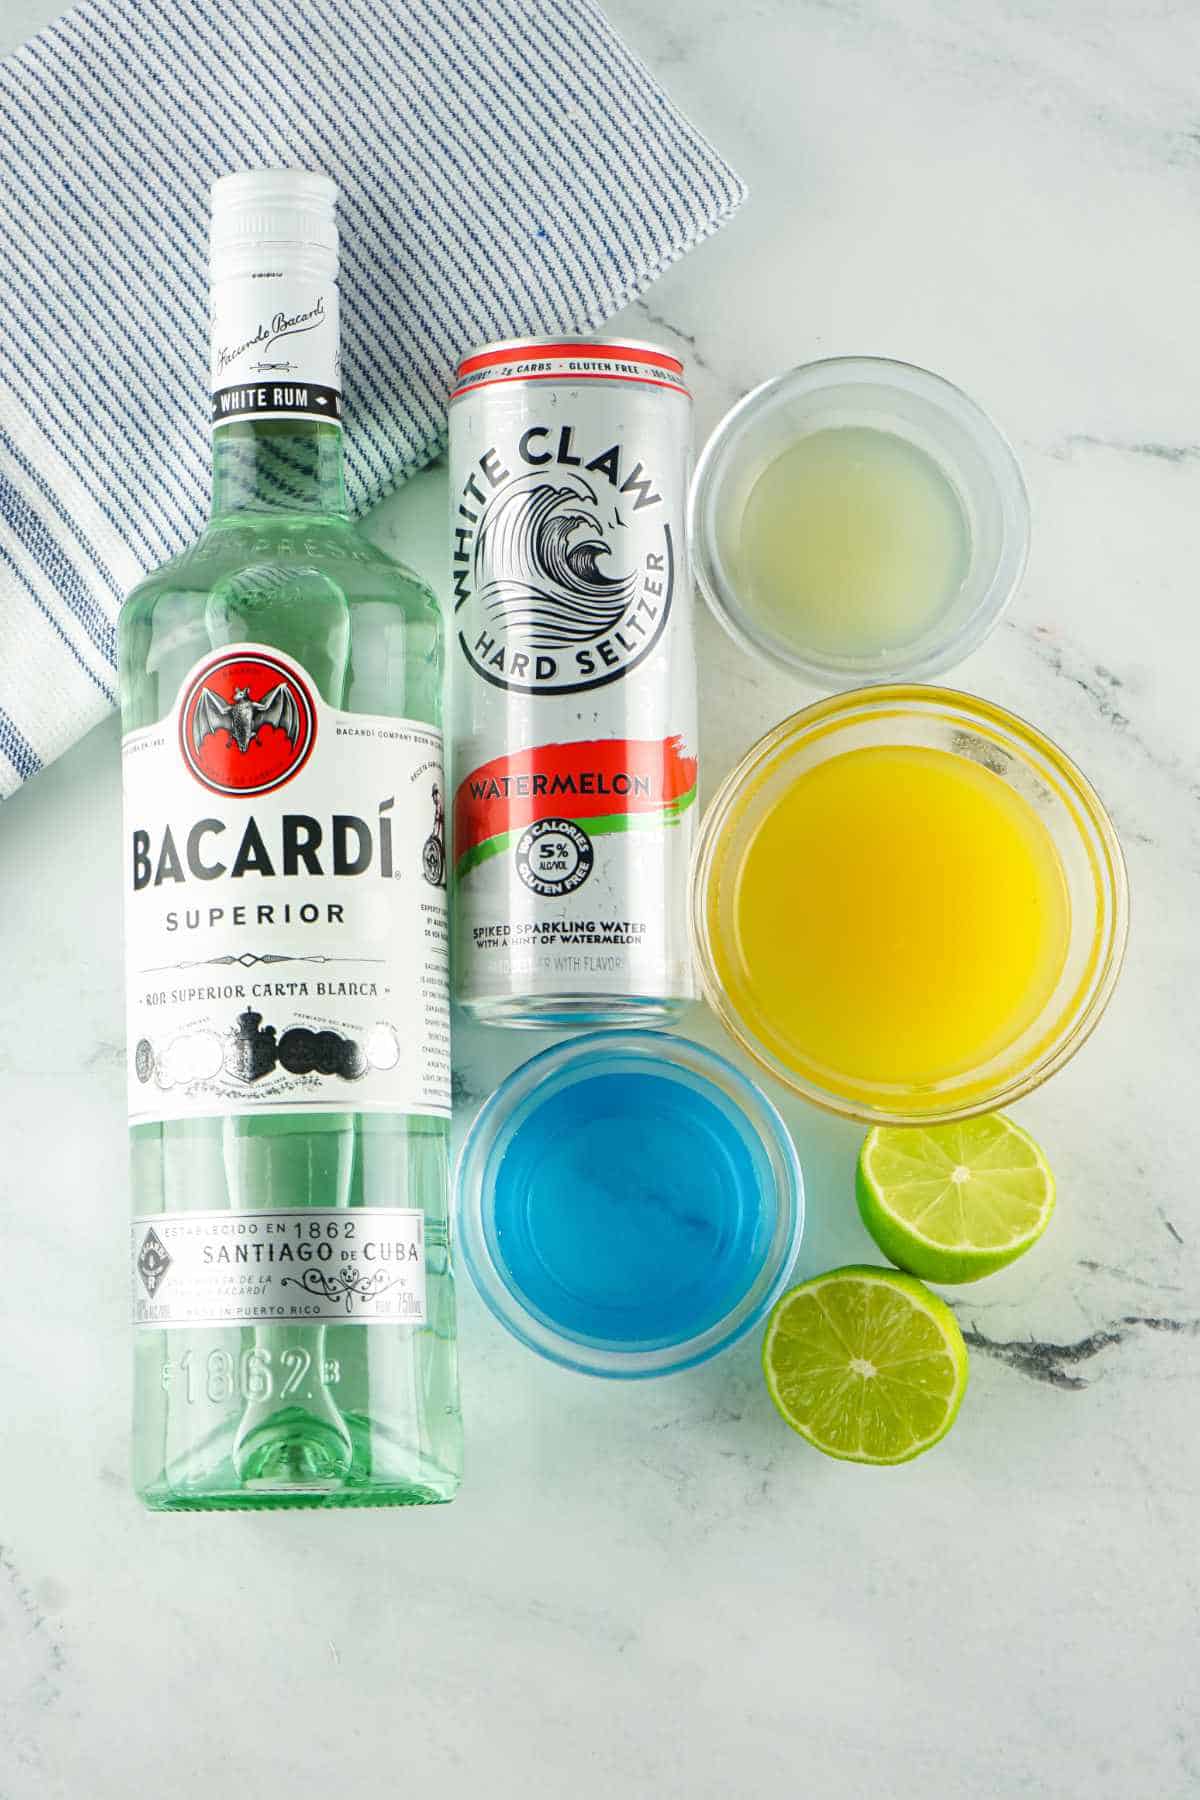 ingredients for making tipsy mermaid drinks: Bacardi Rum, White Claw, pineapple juice, blue curacao, and lime juice.